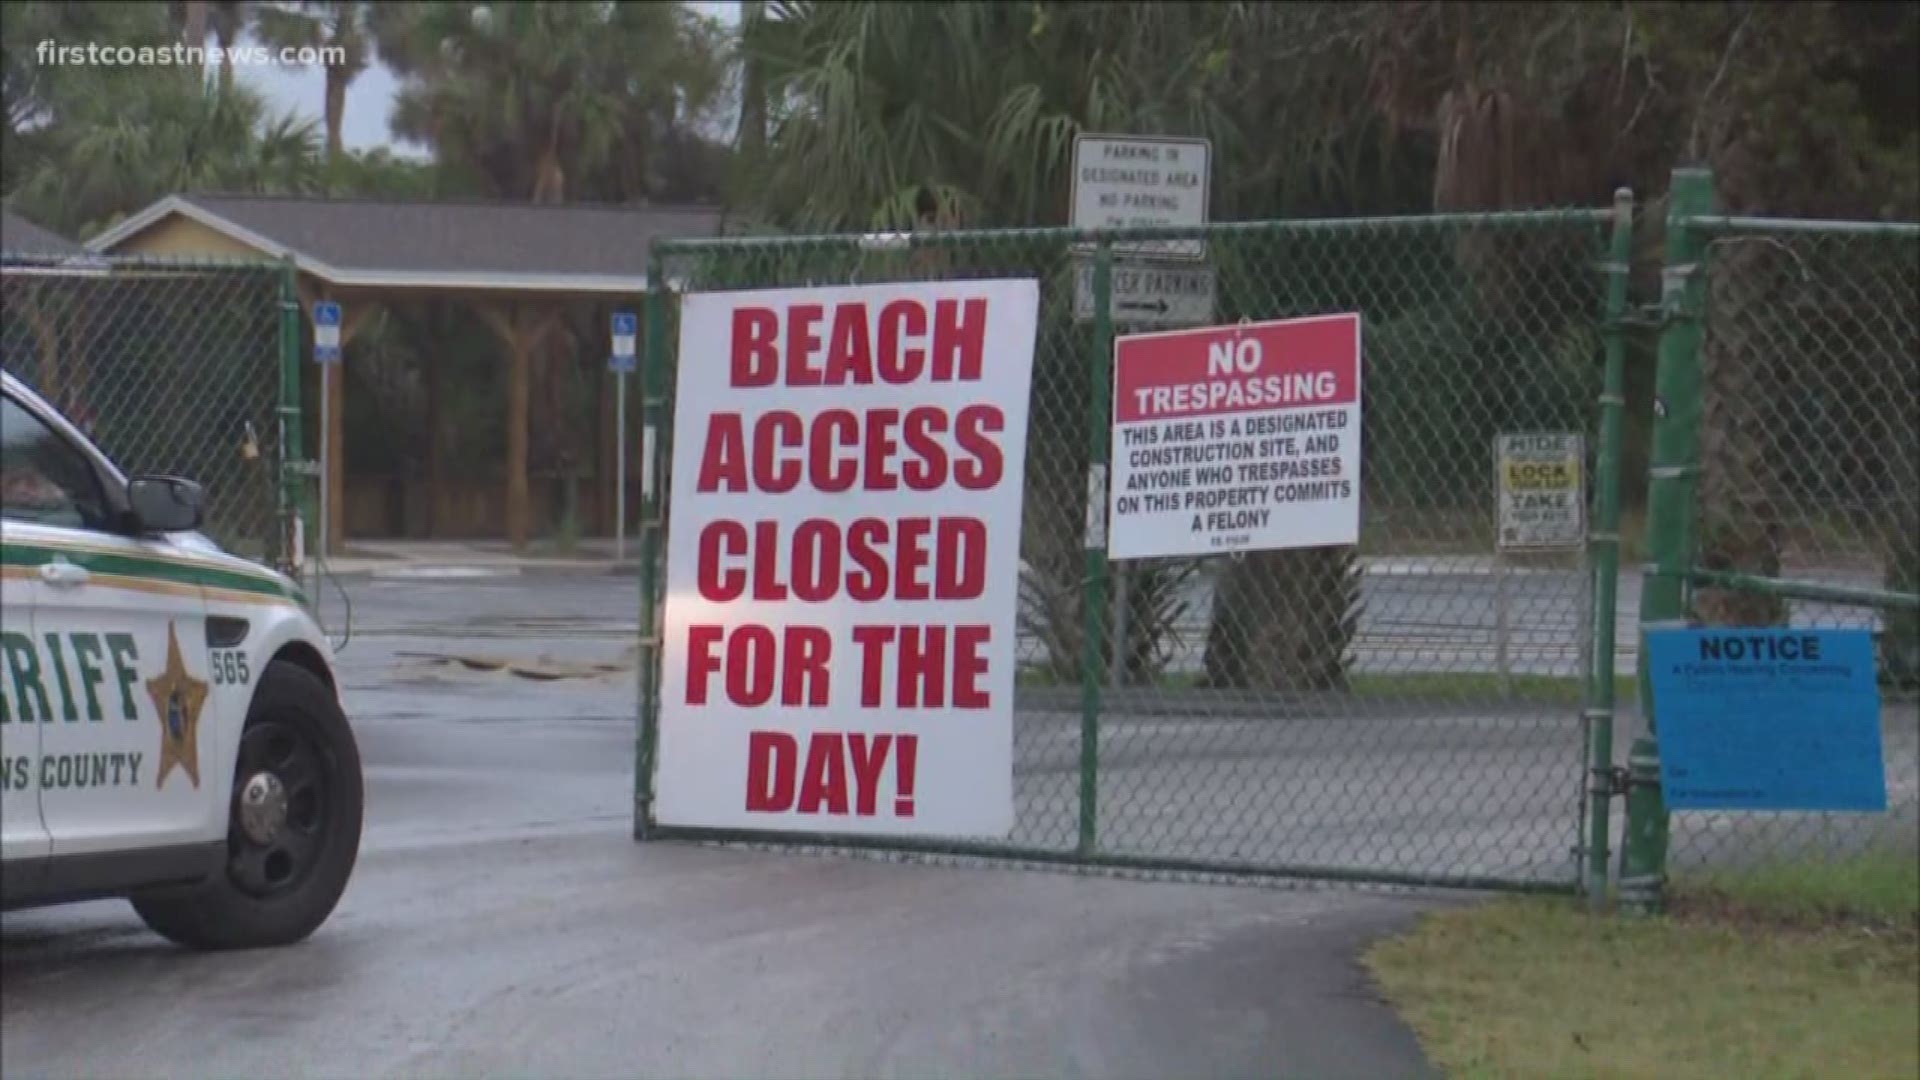 One of the busiest beach access points on the First Coast remains closed.